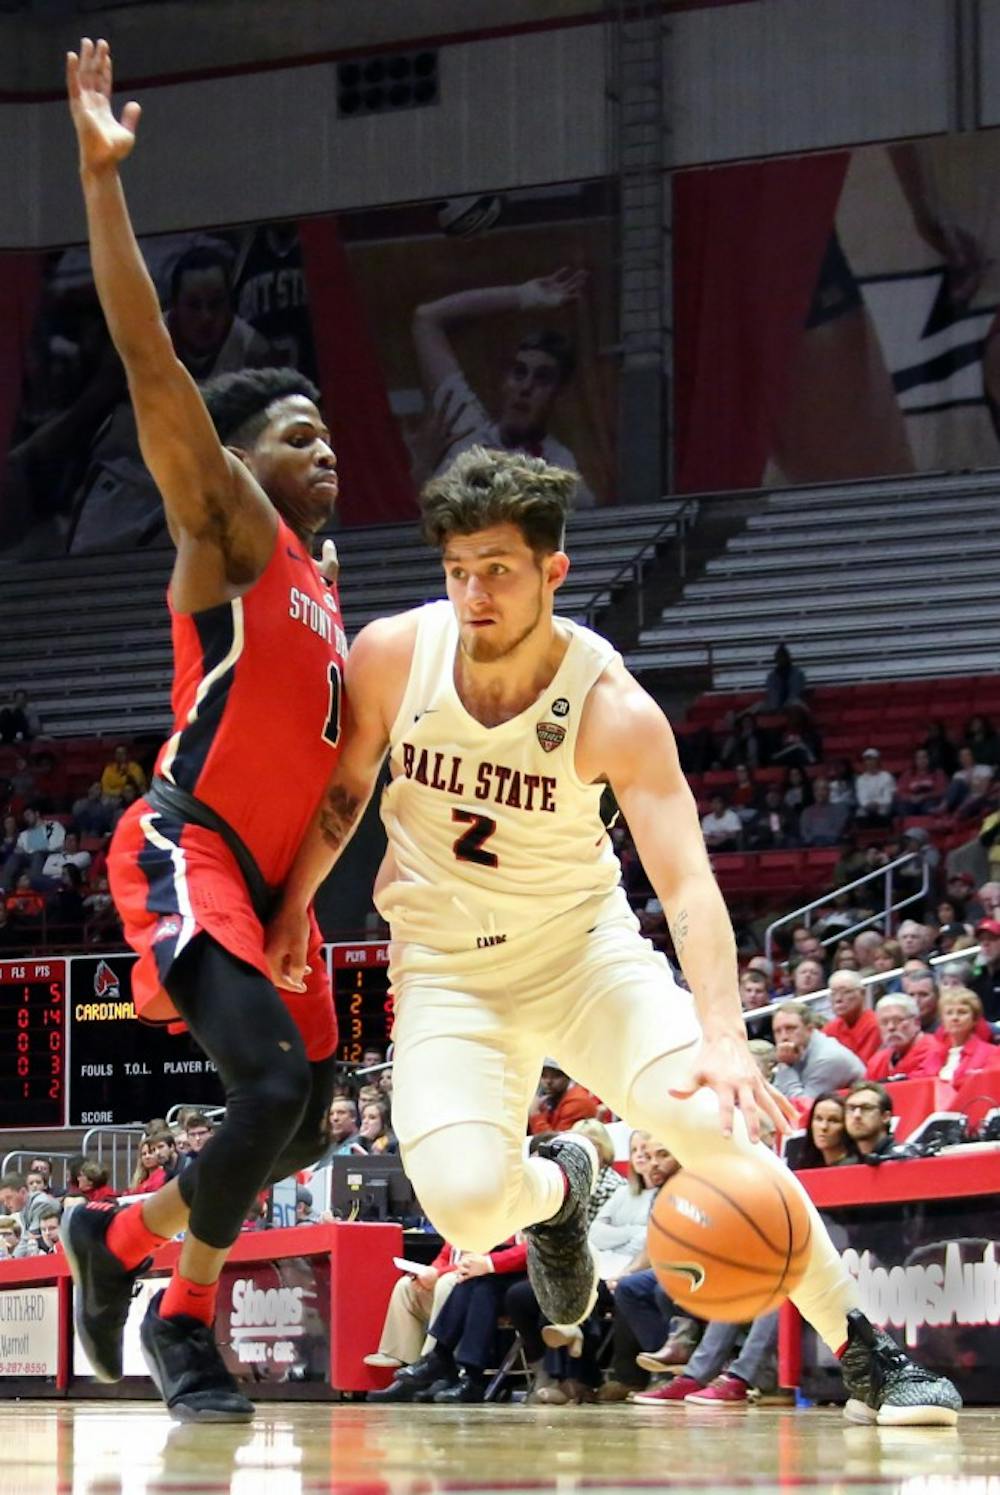 Questionable late calls leads to Ball State's 87-83 loss against Bucknell